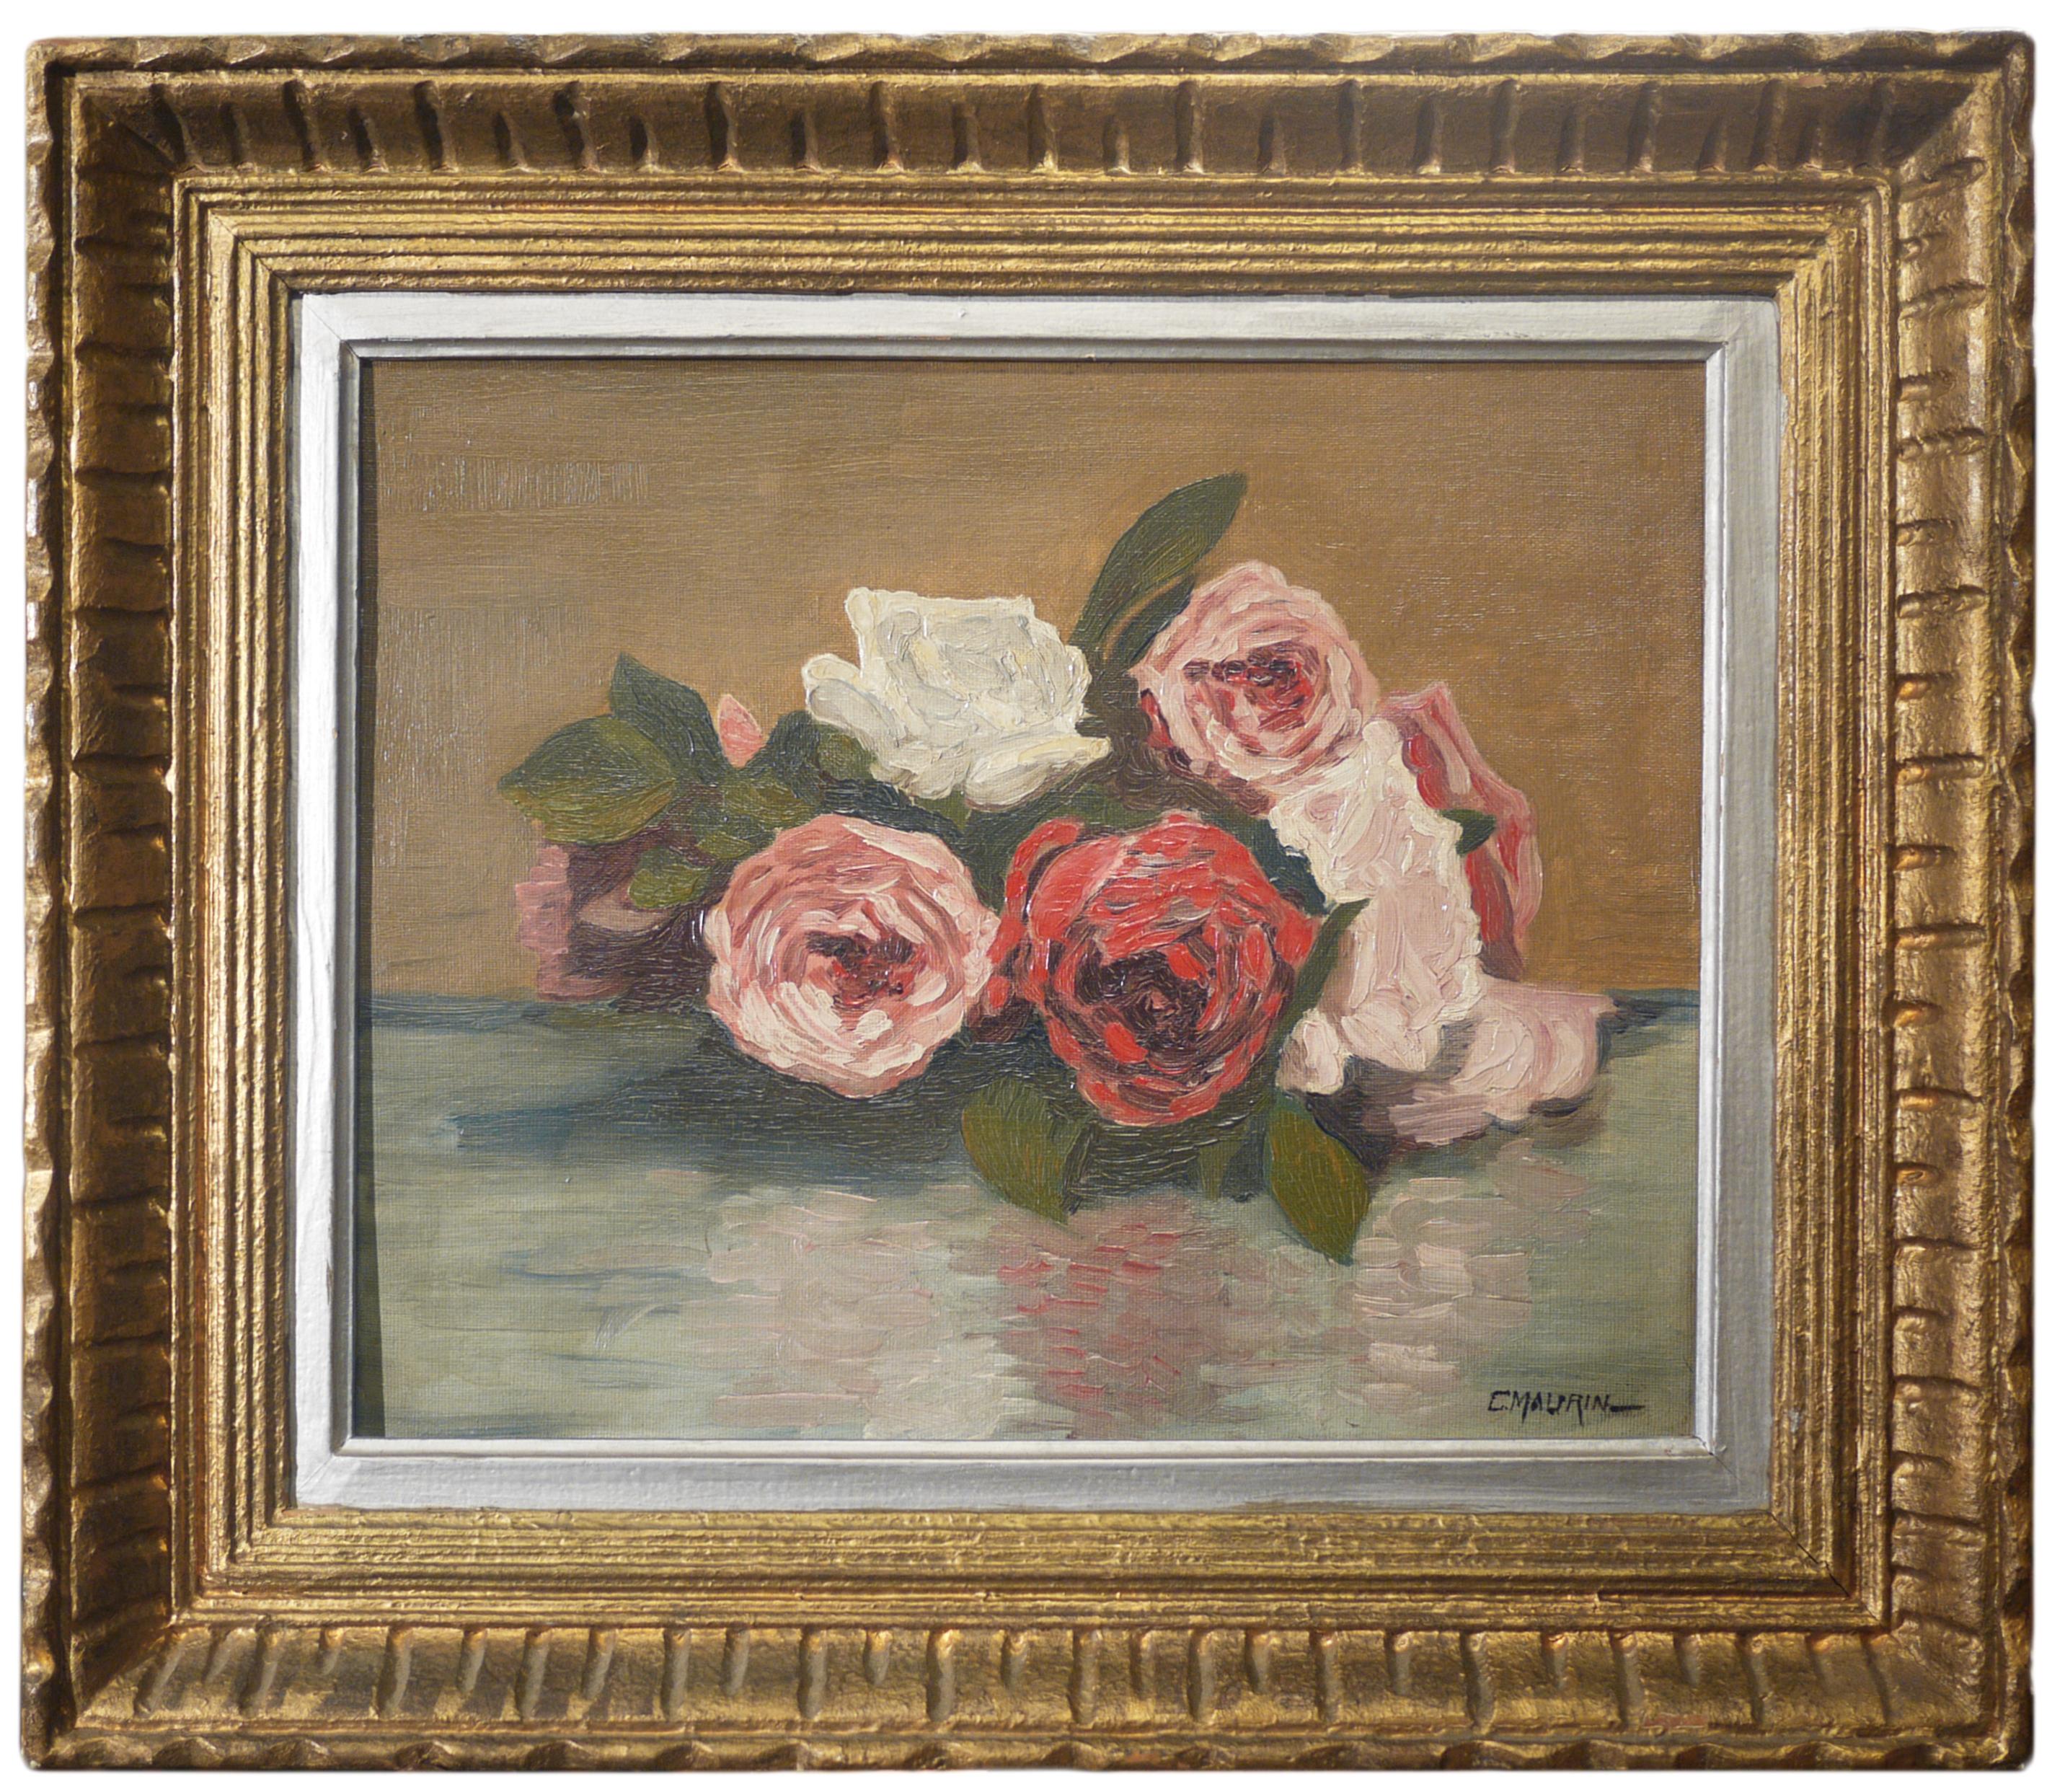 C.Maurin, Paris 1950
Measures:
33 cm x 40 cm (frame excluded)
13 in x 15.7 in (frame excluded)
oil on board

Painting depicting a floral composition with red, pink and white roses, placed on a table with a reflective surface.
The painting is